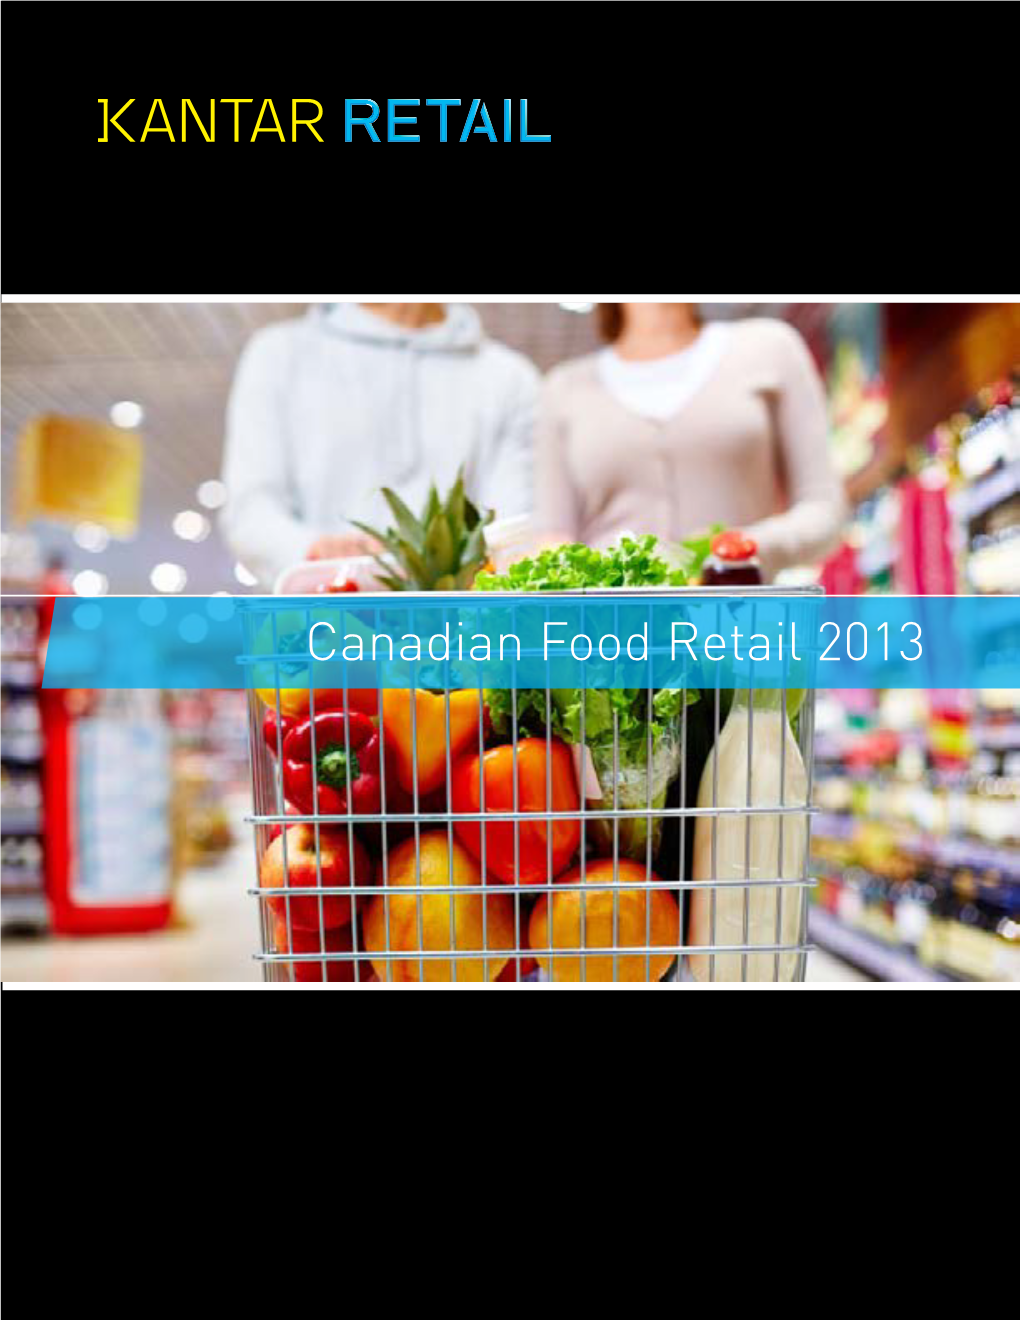 Canadian Food Retail 2013